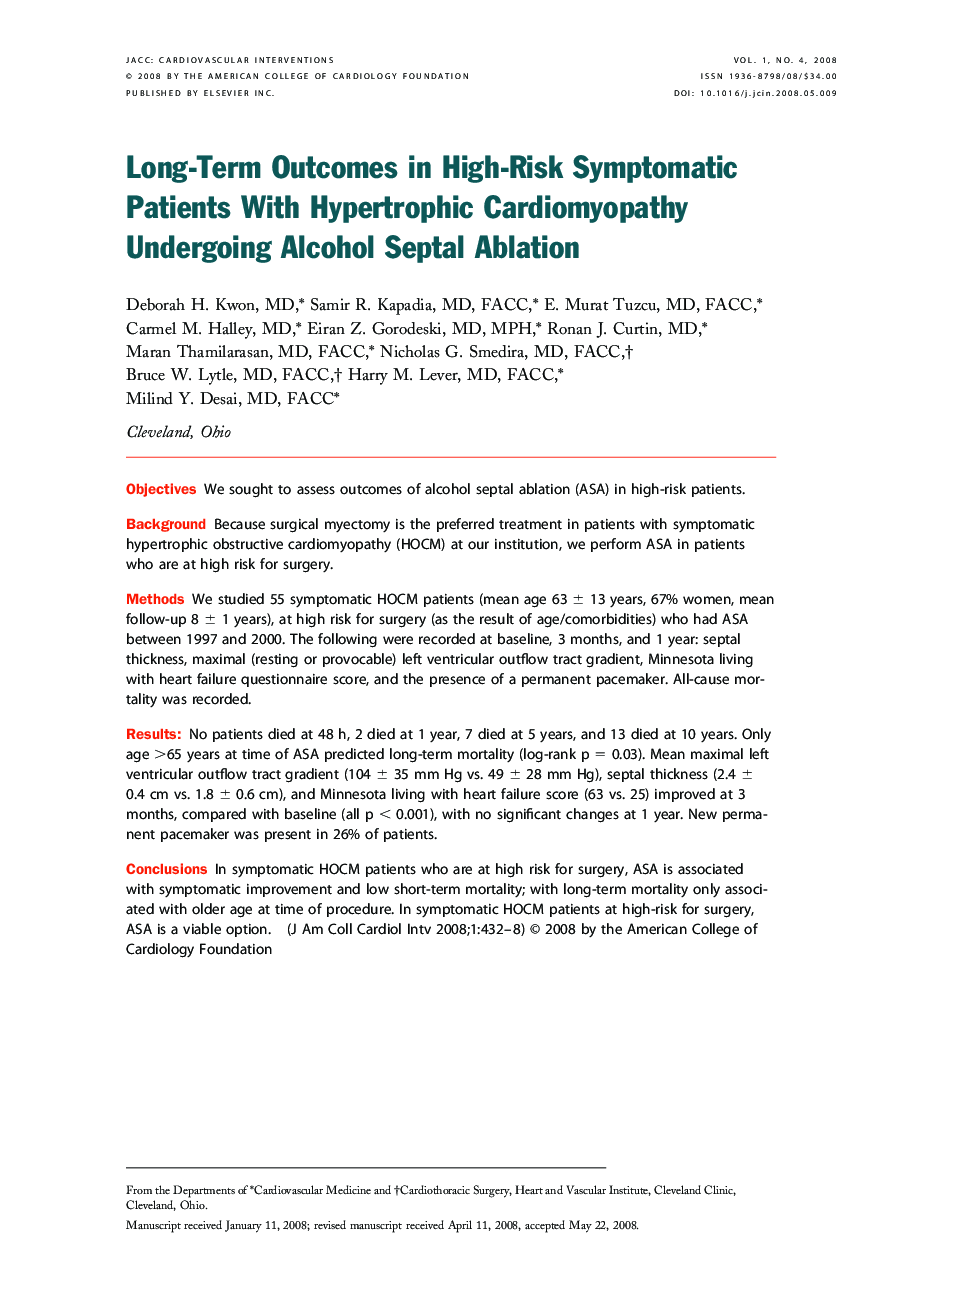 Long-Term Outcomes in High-Risk Symptomatic Patients With Hypertrophic Cardiomyopathy Undergoing Alcohol Septal Ablation